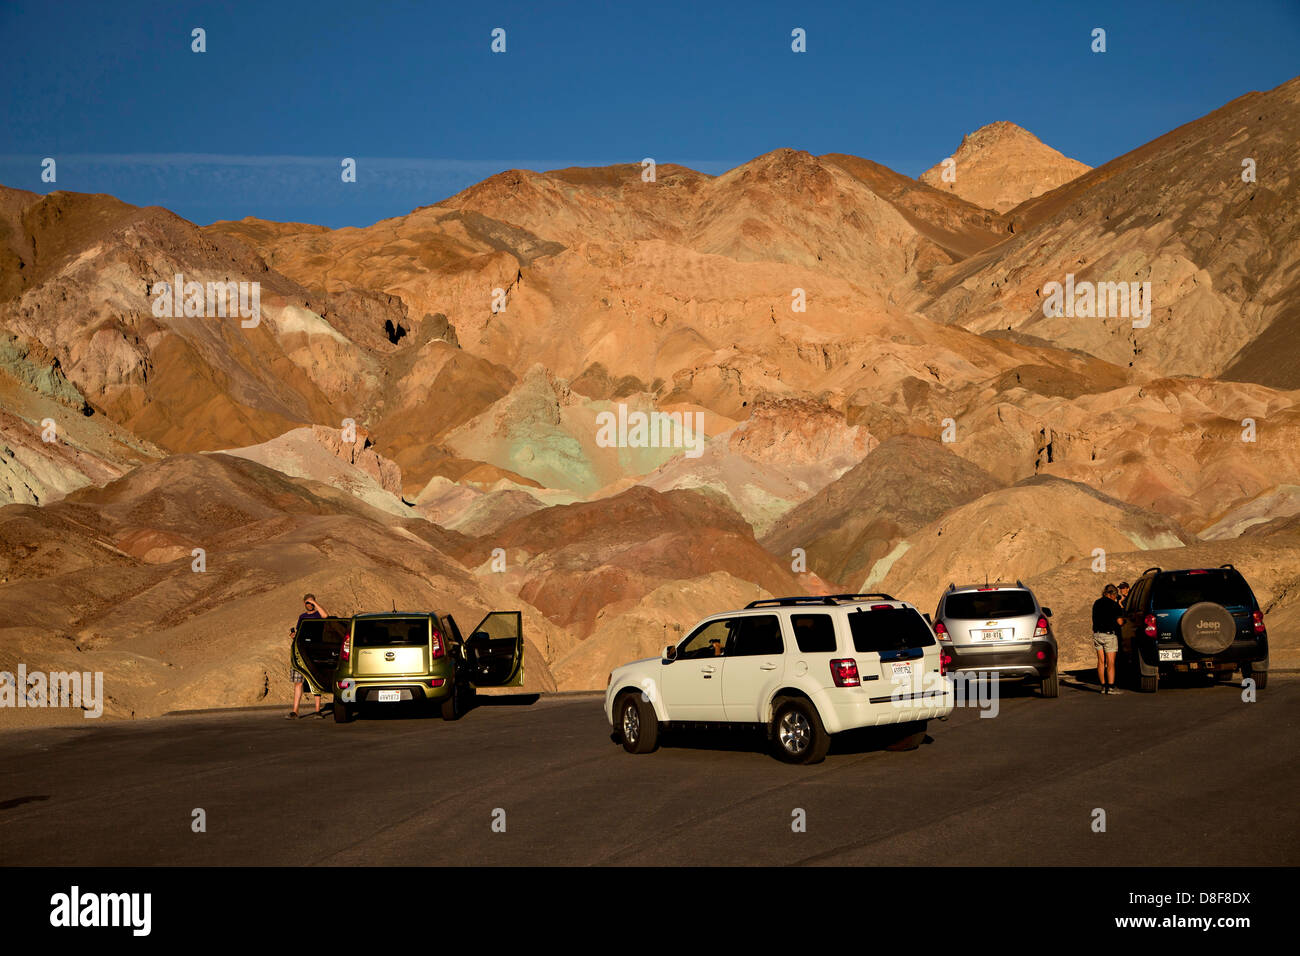 parking lot at the colourful rocks of Artists Drive and Artist’s Palette, Death Valley National Park in California, Stock Photo